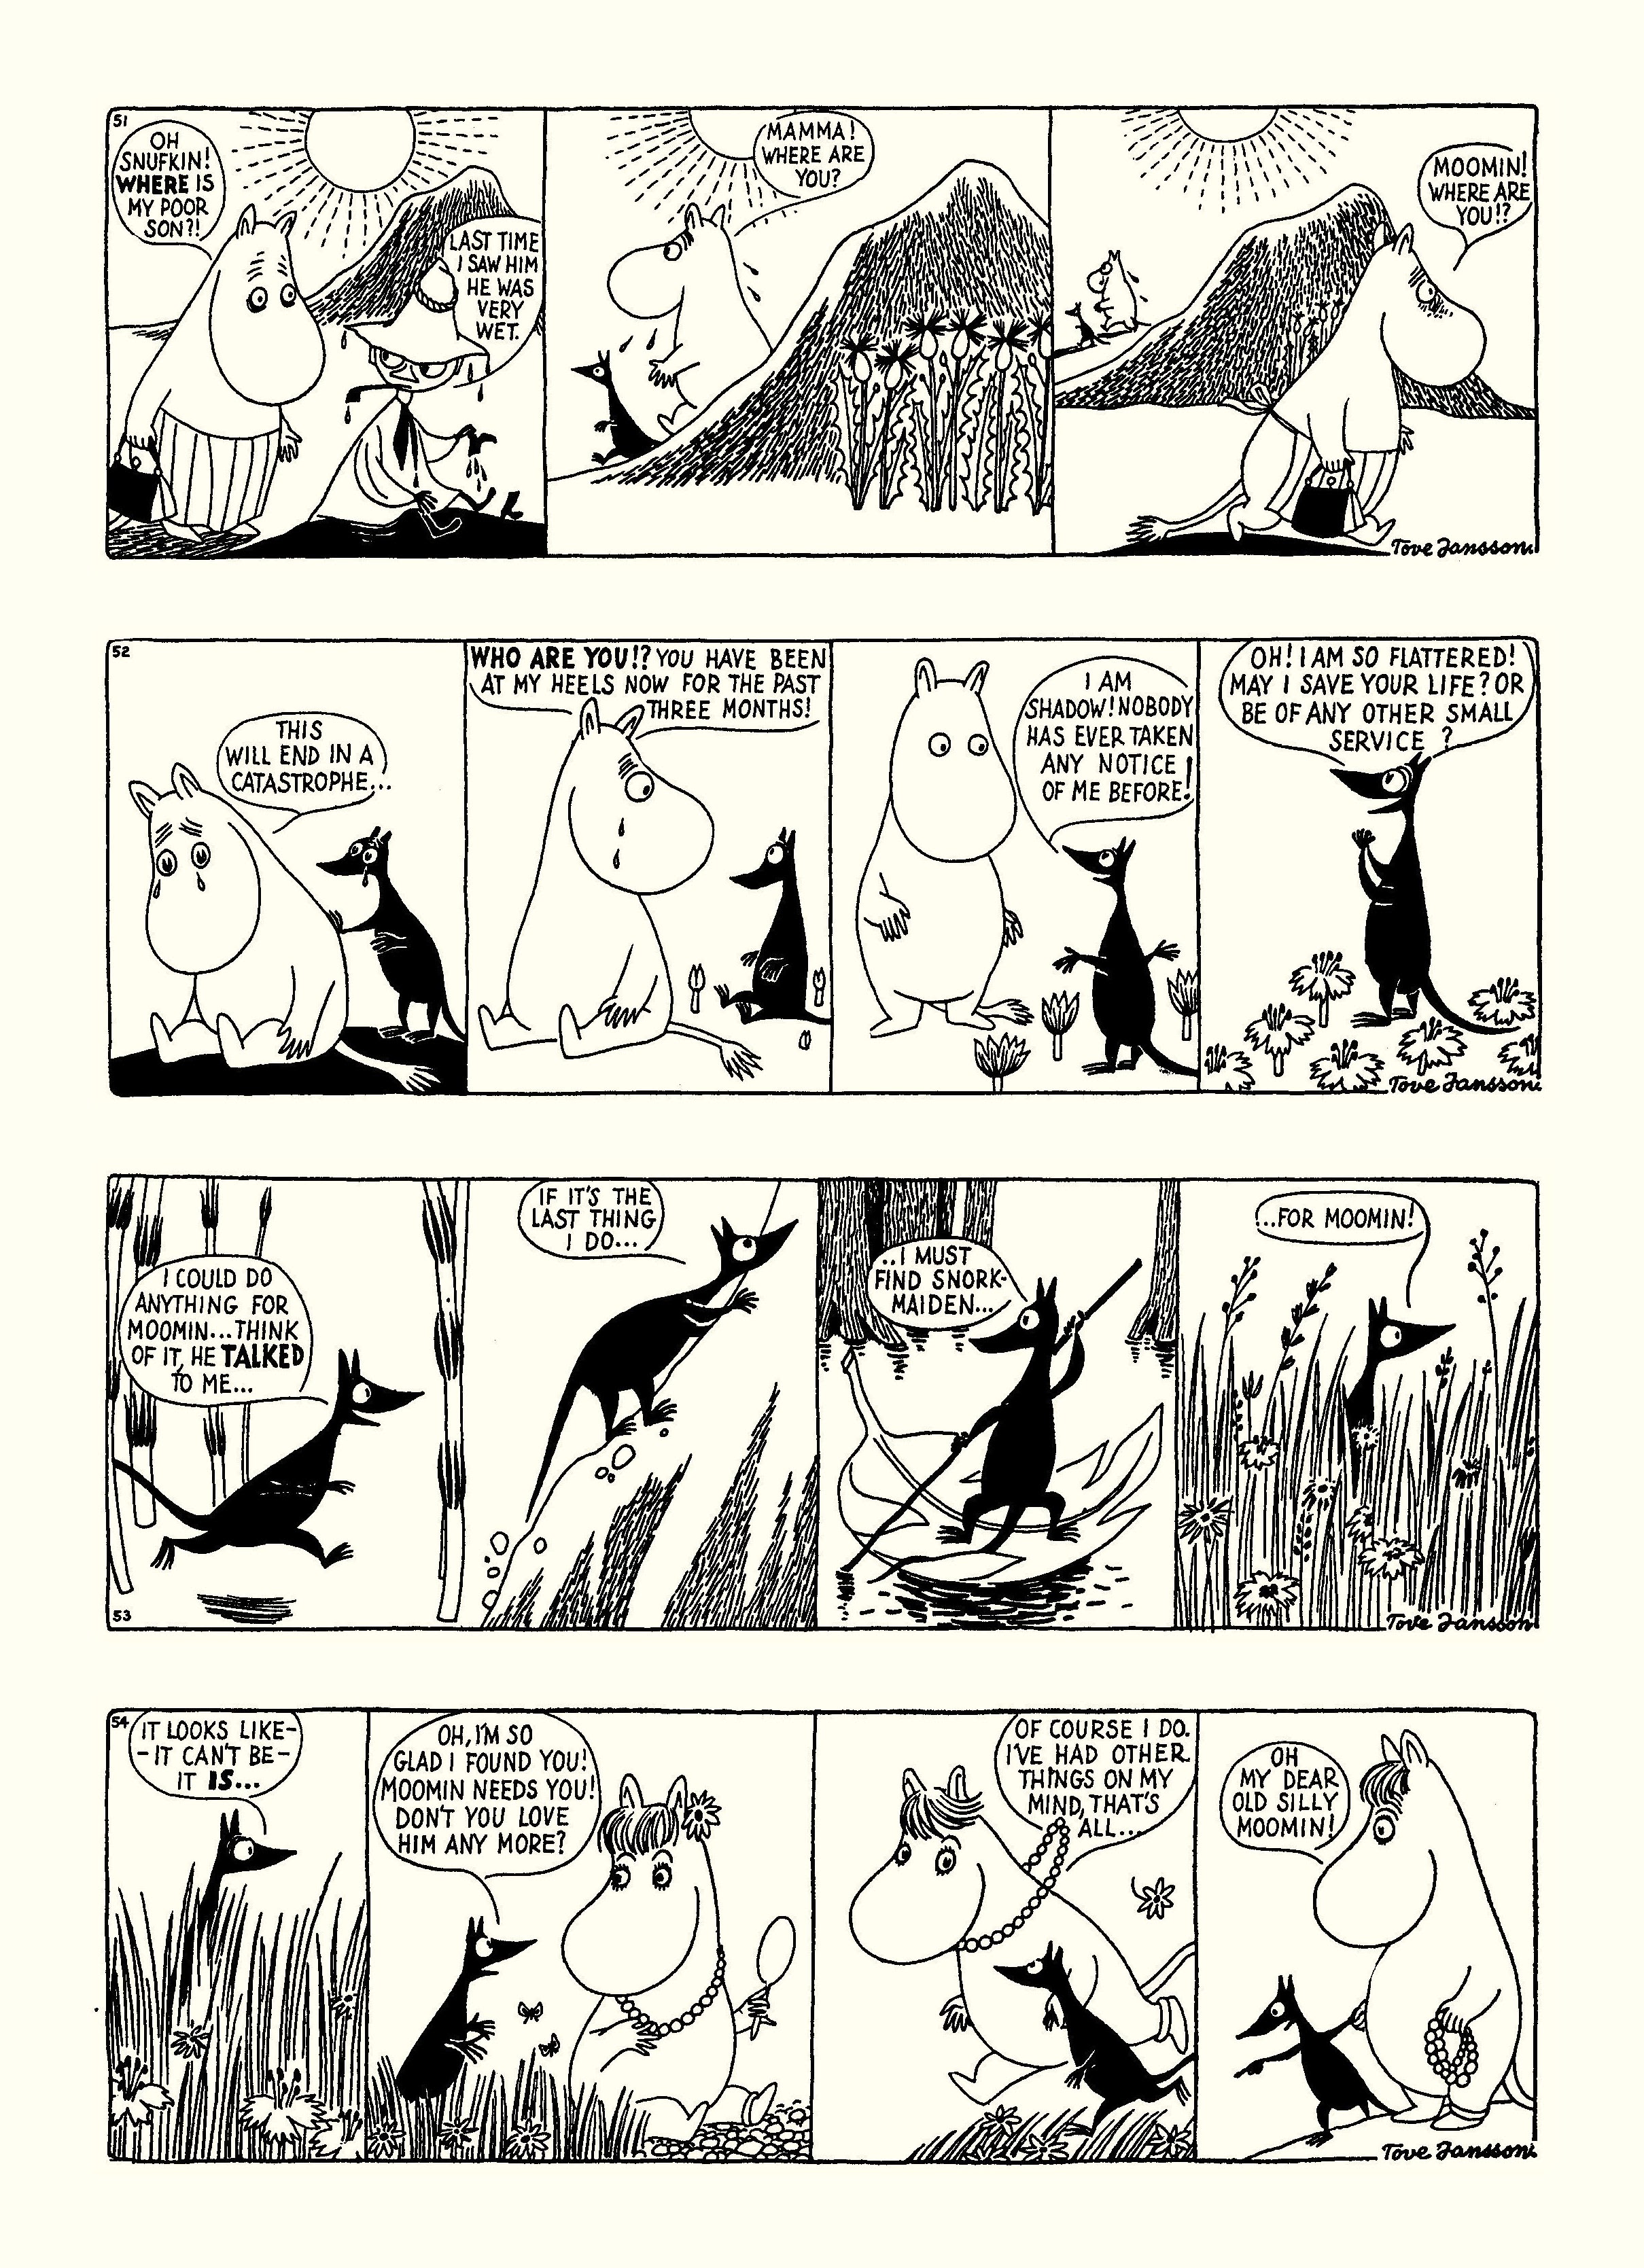 Read online Moomin: The Complete Tove Jansson Comic Strip comic -  Issue # TPB 1 - 43